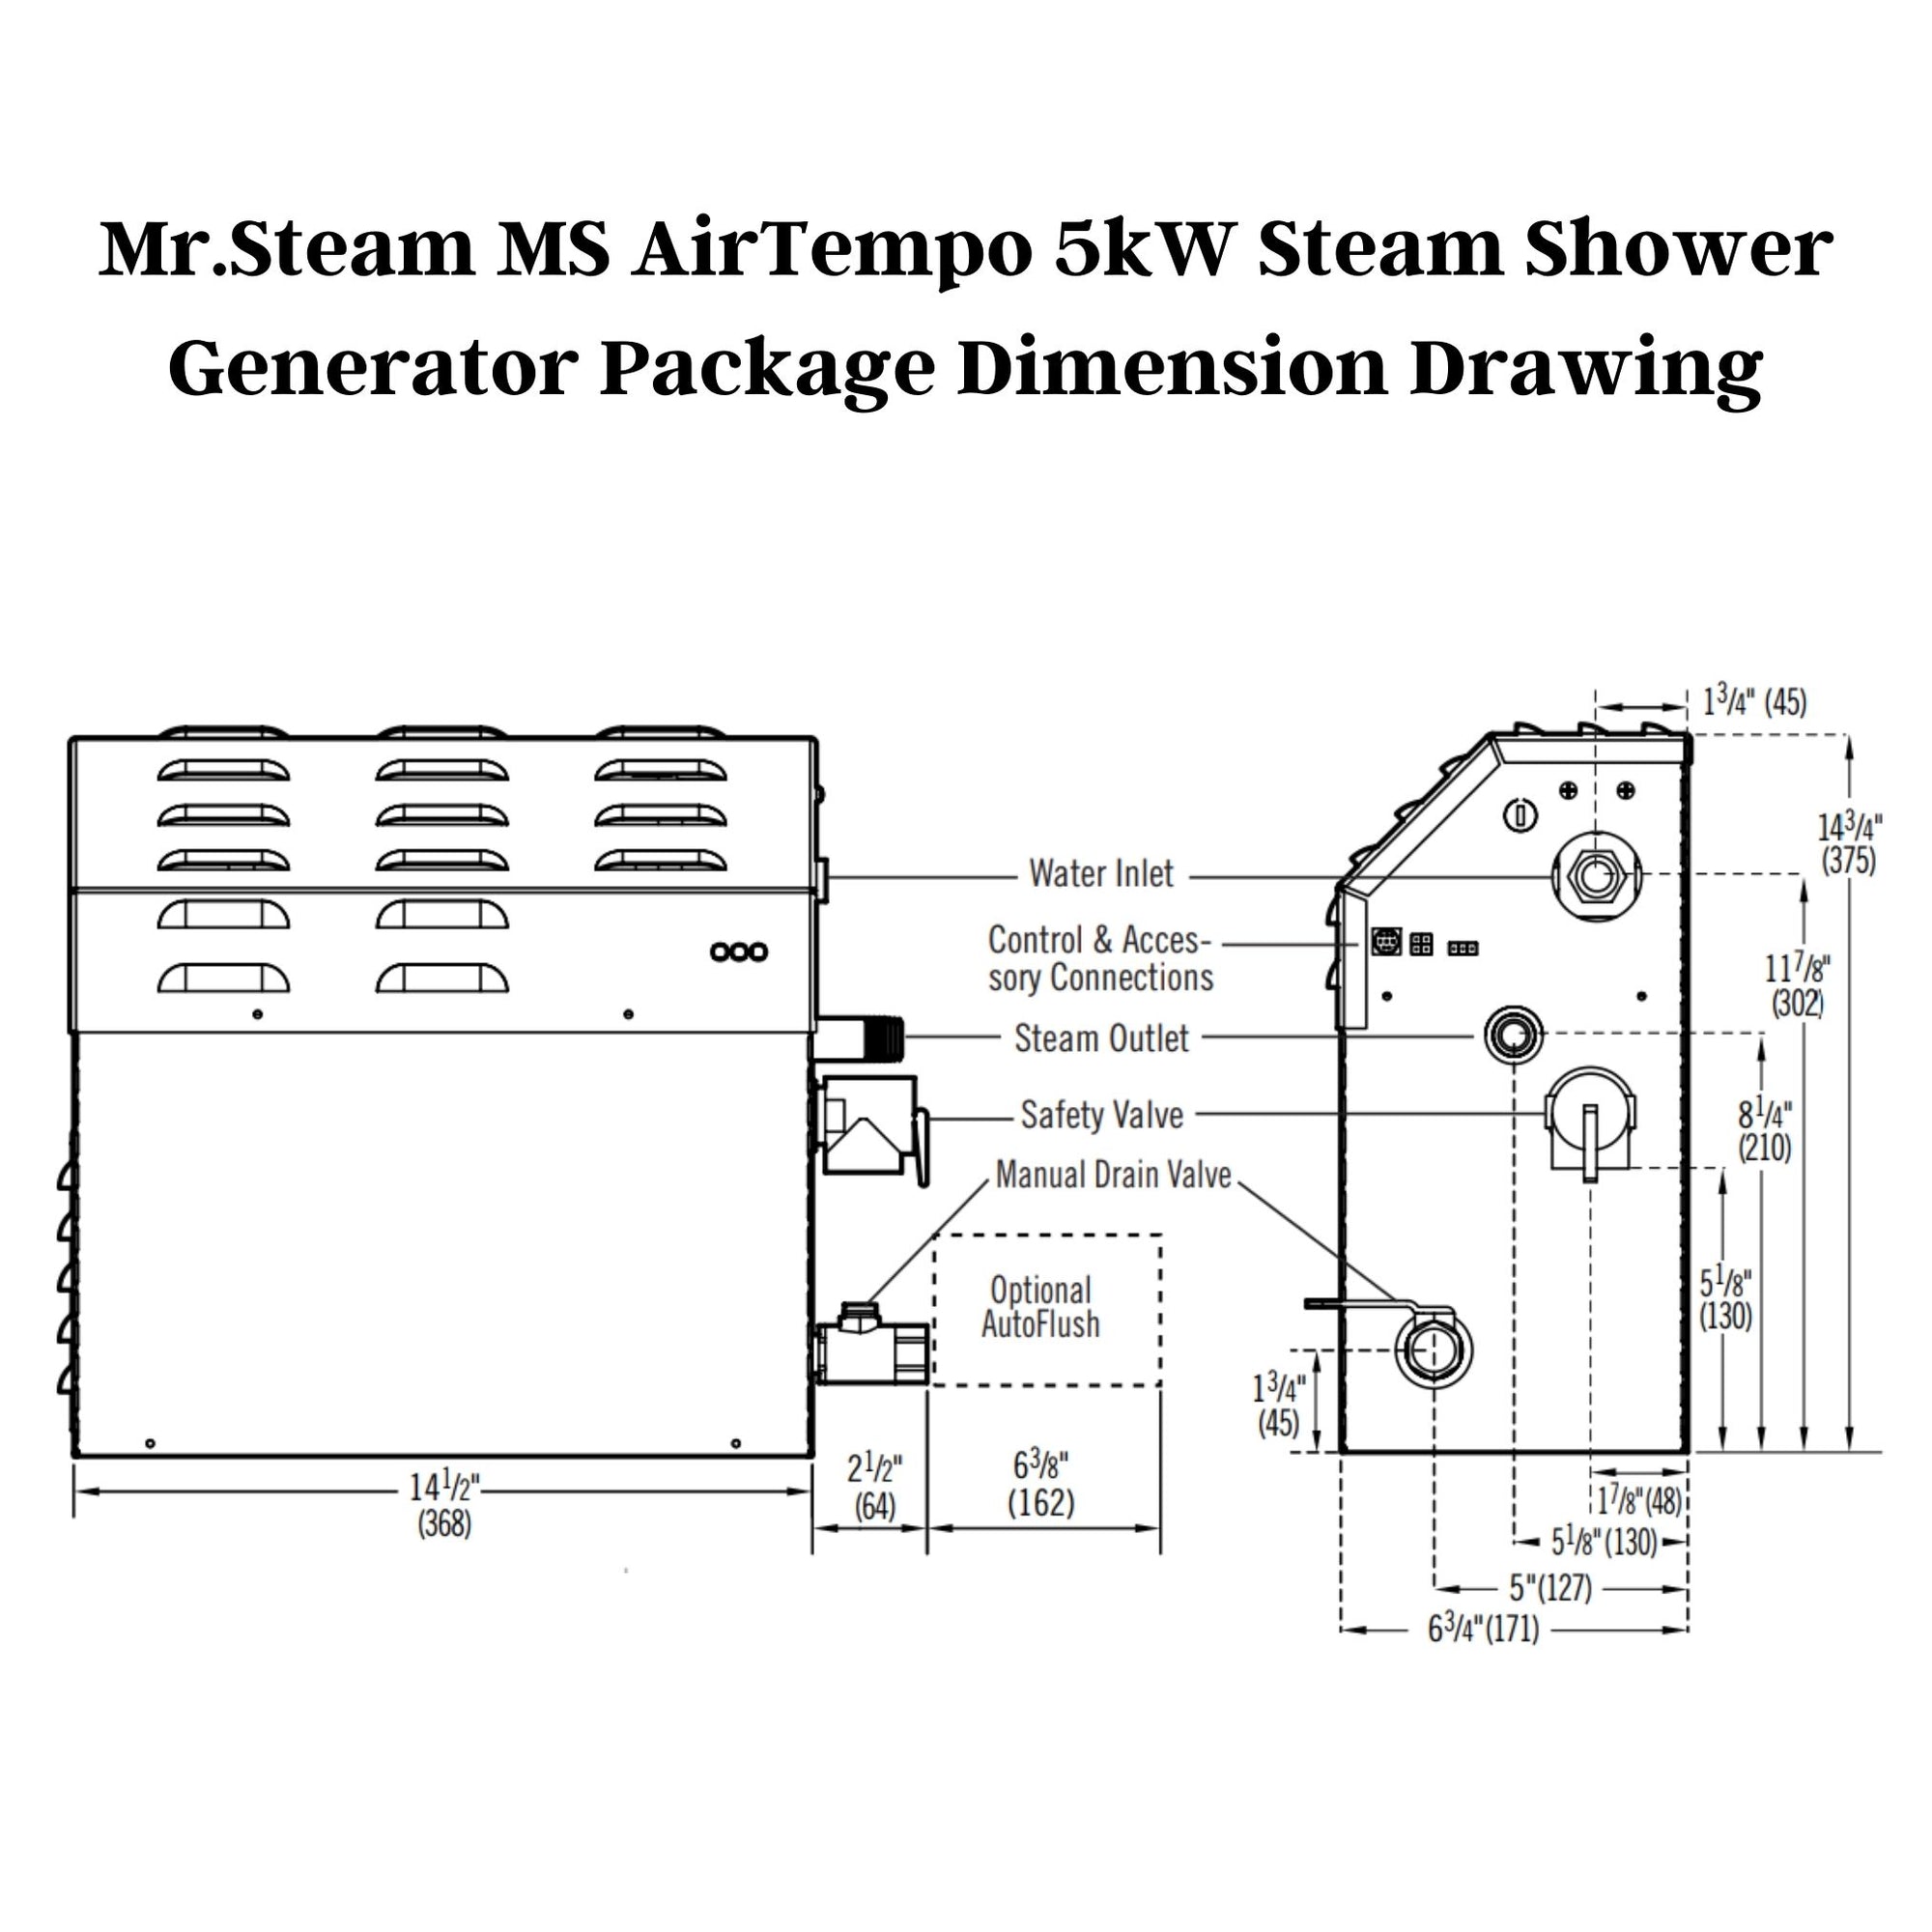 Mr. Steam 5kW MS (AirTempo) Steam Shower Generator Package with AirTempo Control in Black Polished Chrome 05C10EAA000